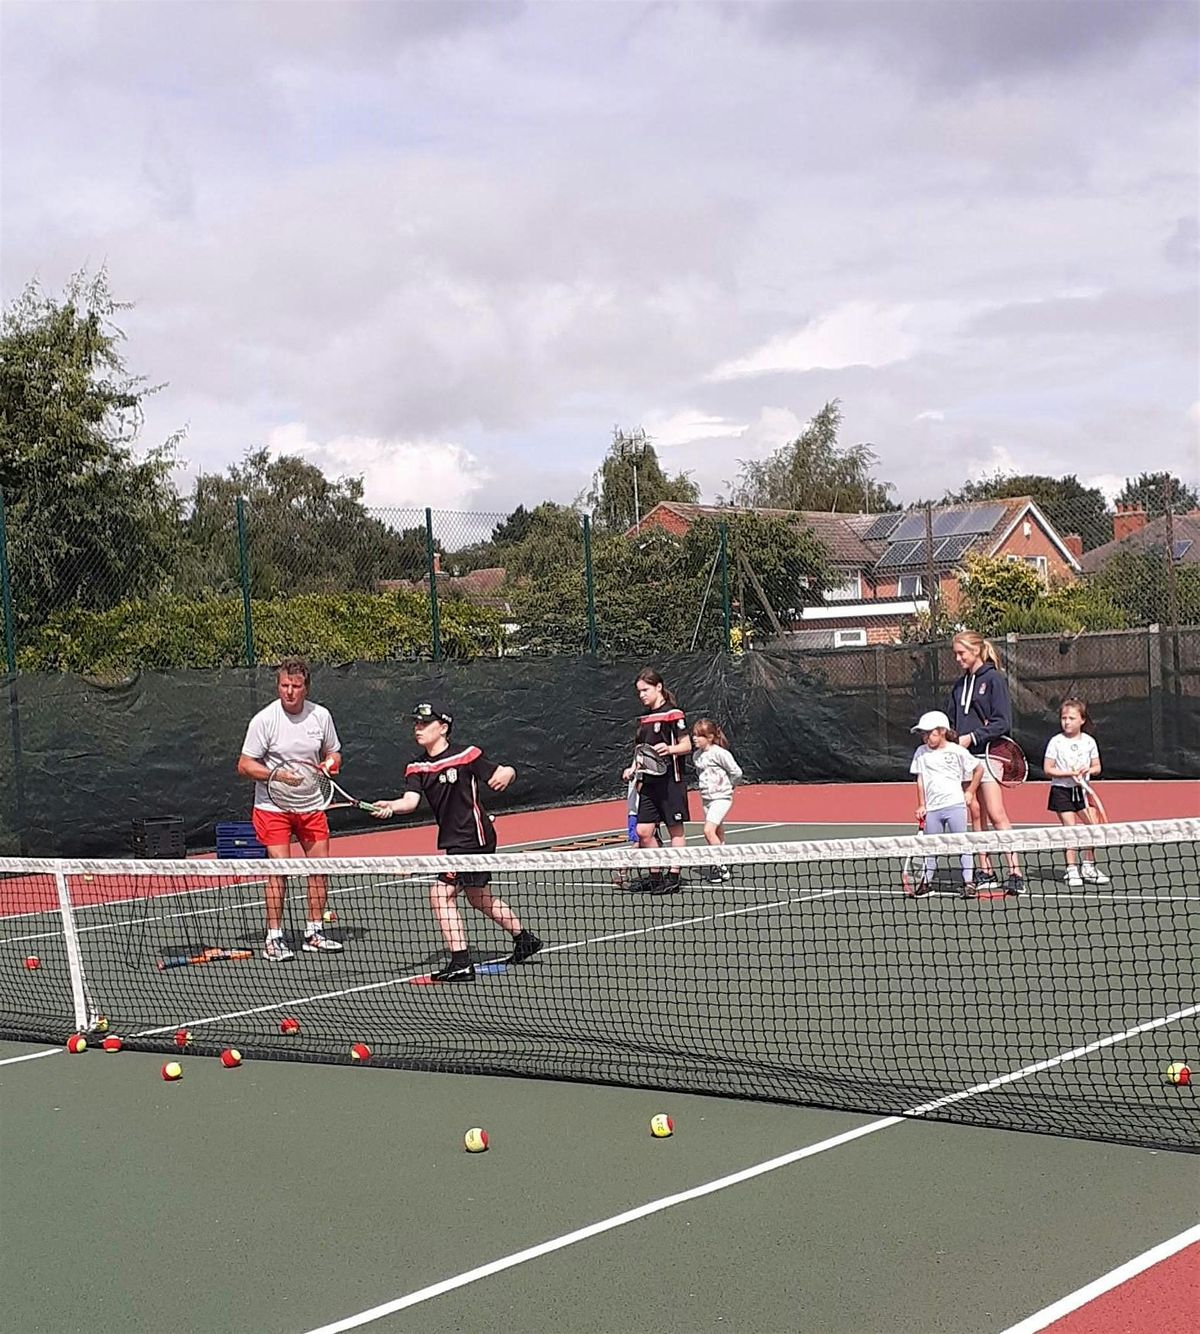 Free Summer Tennis Sessions in Retford Ages 7-16 with breakfast & lunch